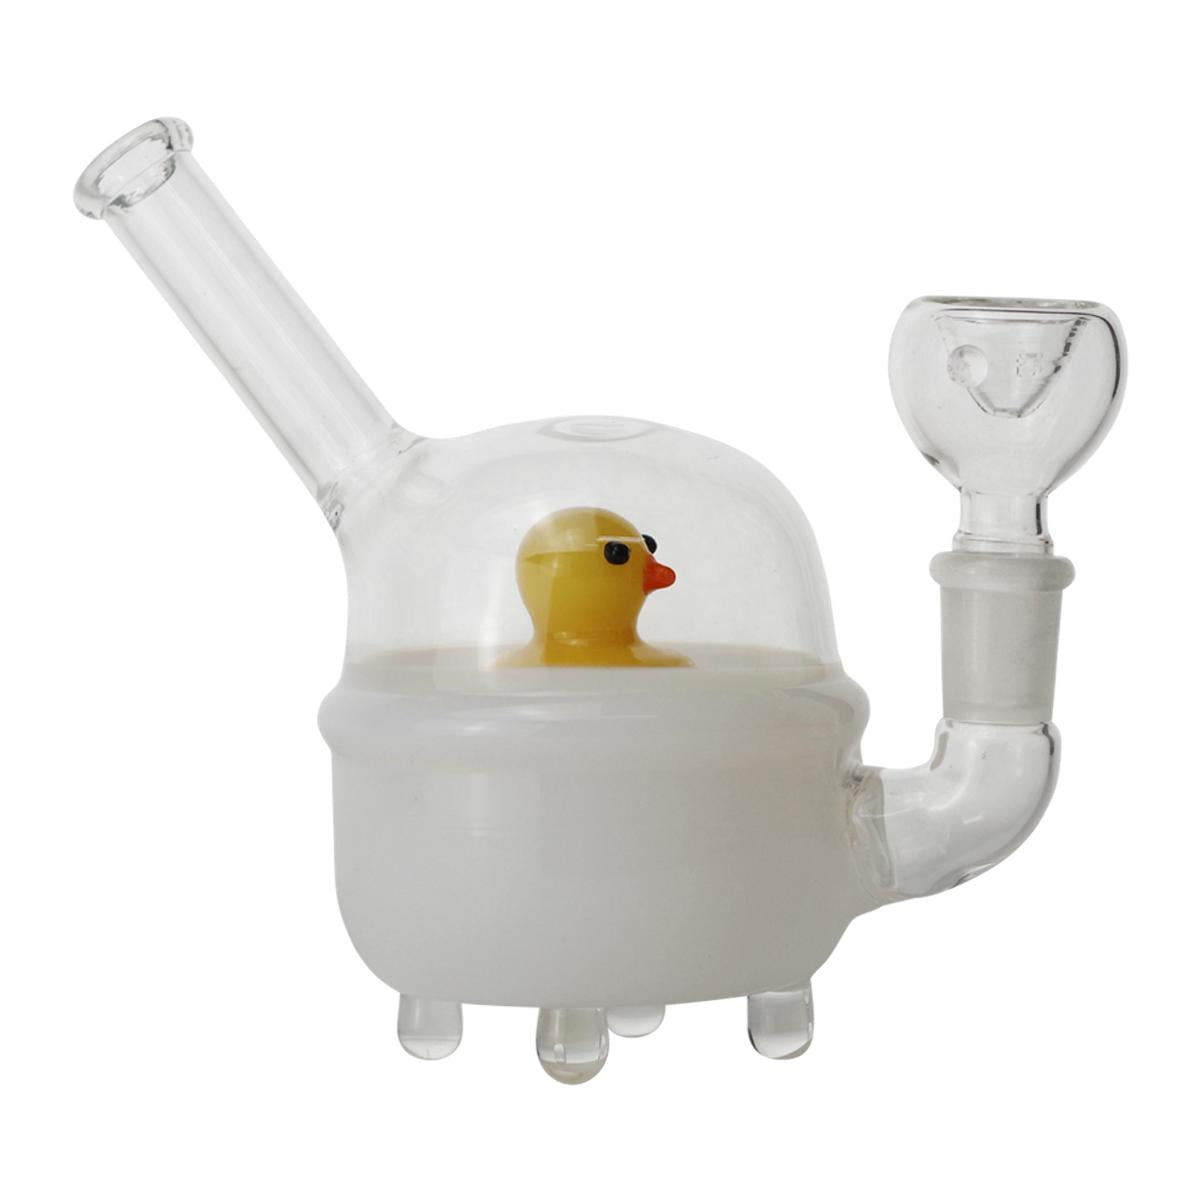 6" Glass Water Pipe Rubber Ducky Design Bong - Supply Natural